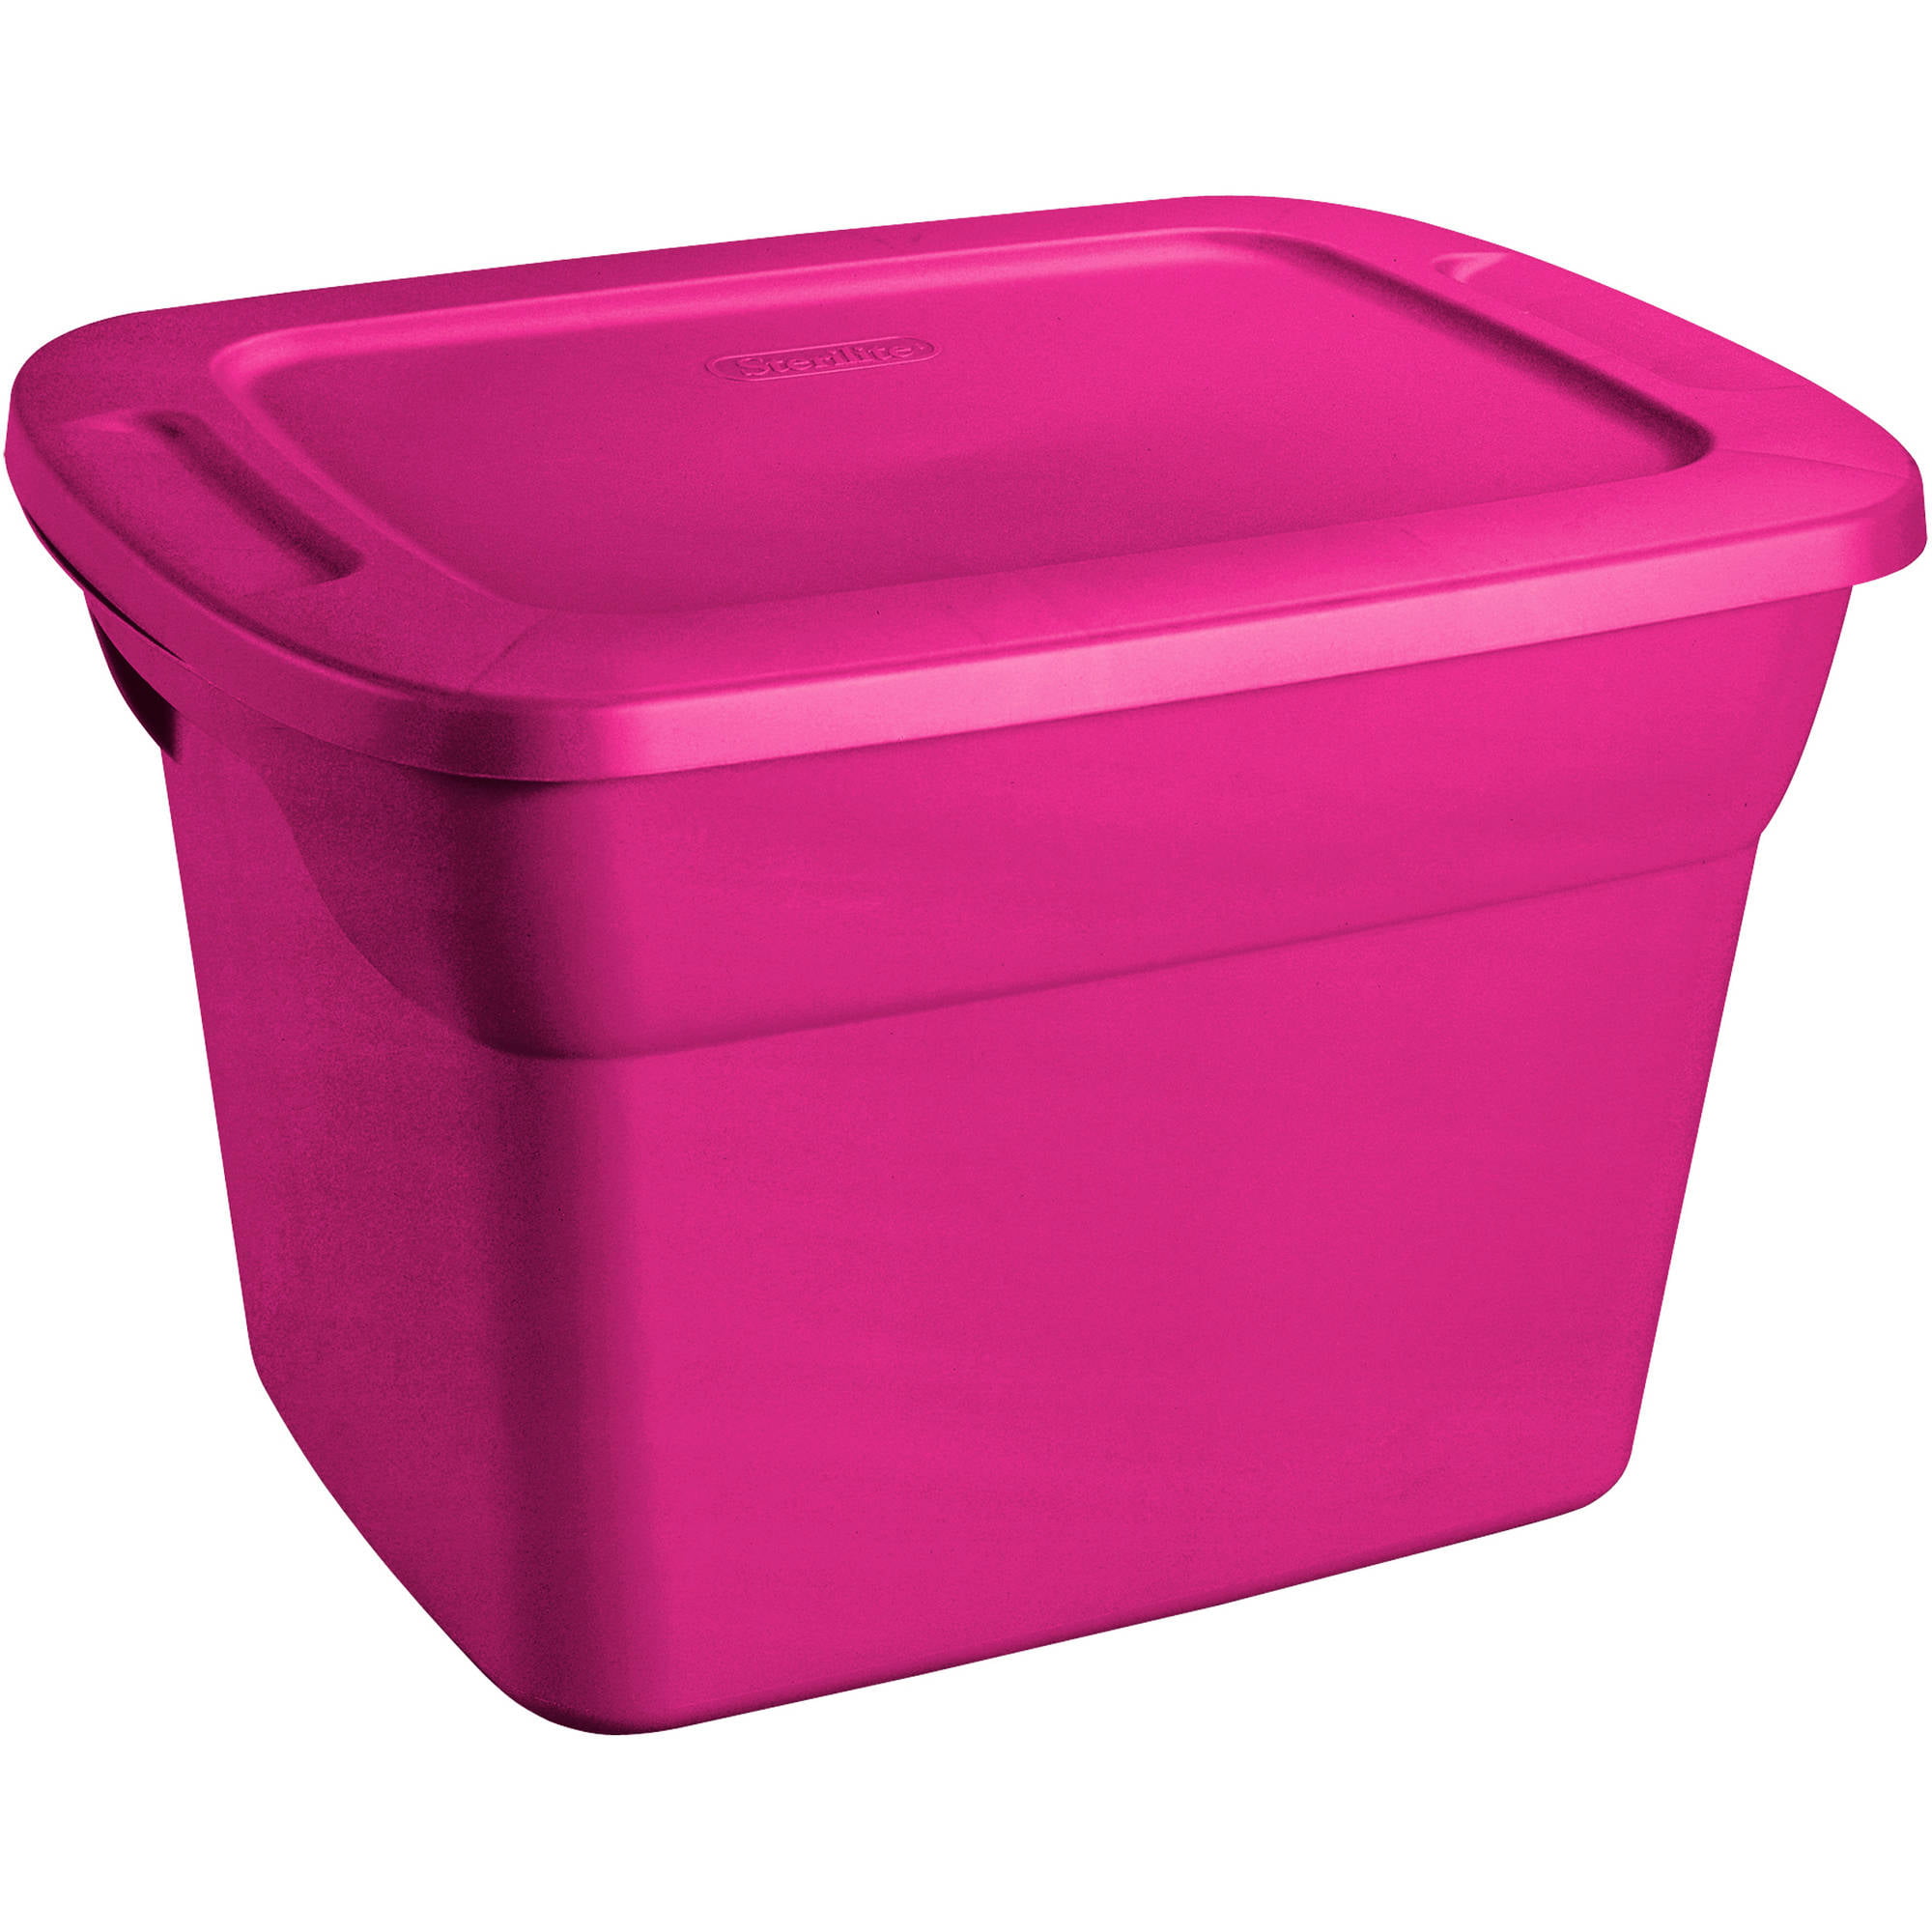 What are some retailers that sell Sterilite containers?